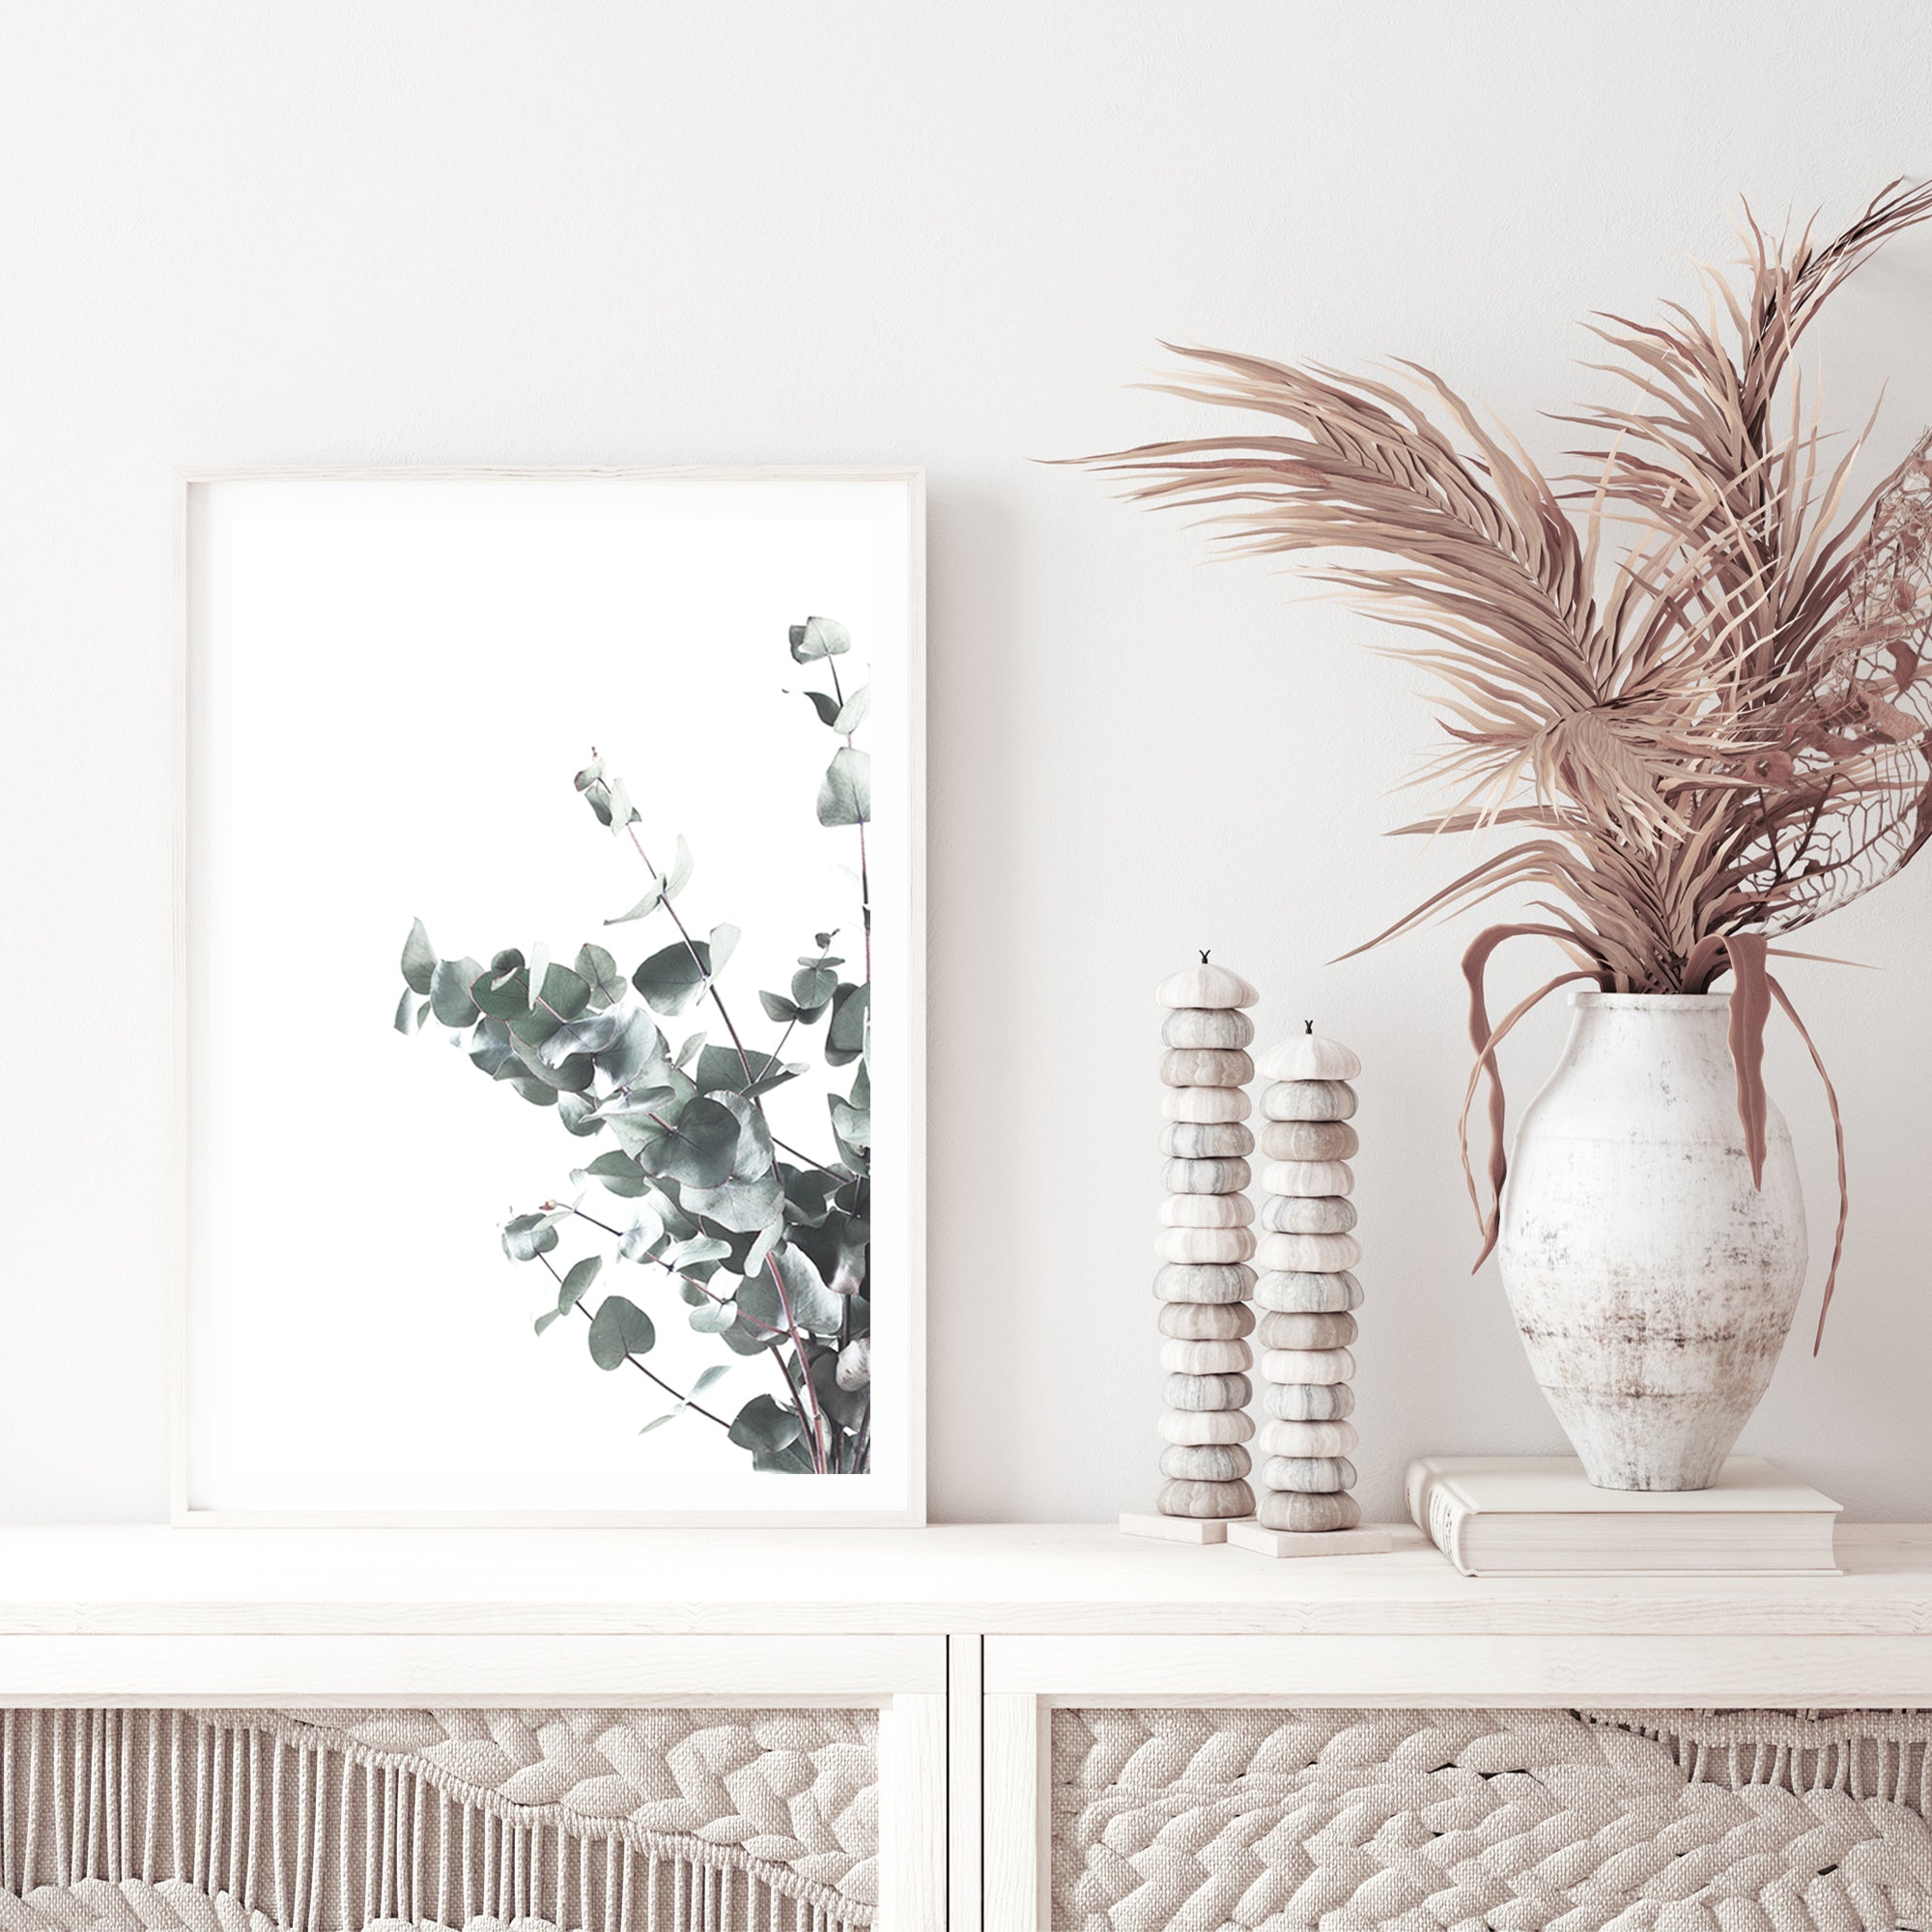 A framed or unframed artwork feauturing eucalyptus leaves (B)with a light background available as a canvas or photo print.